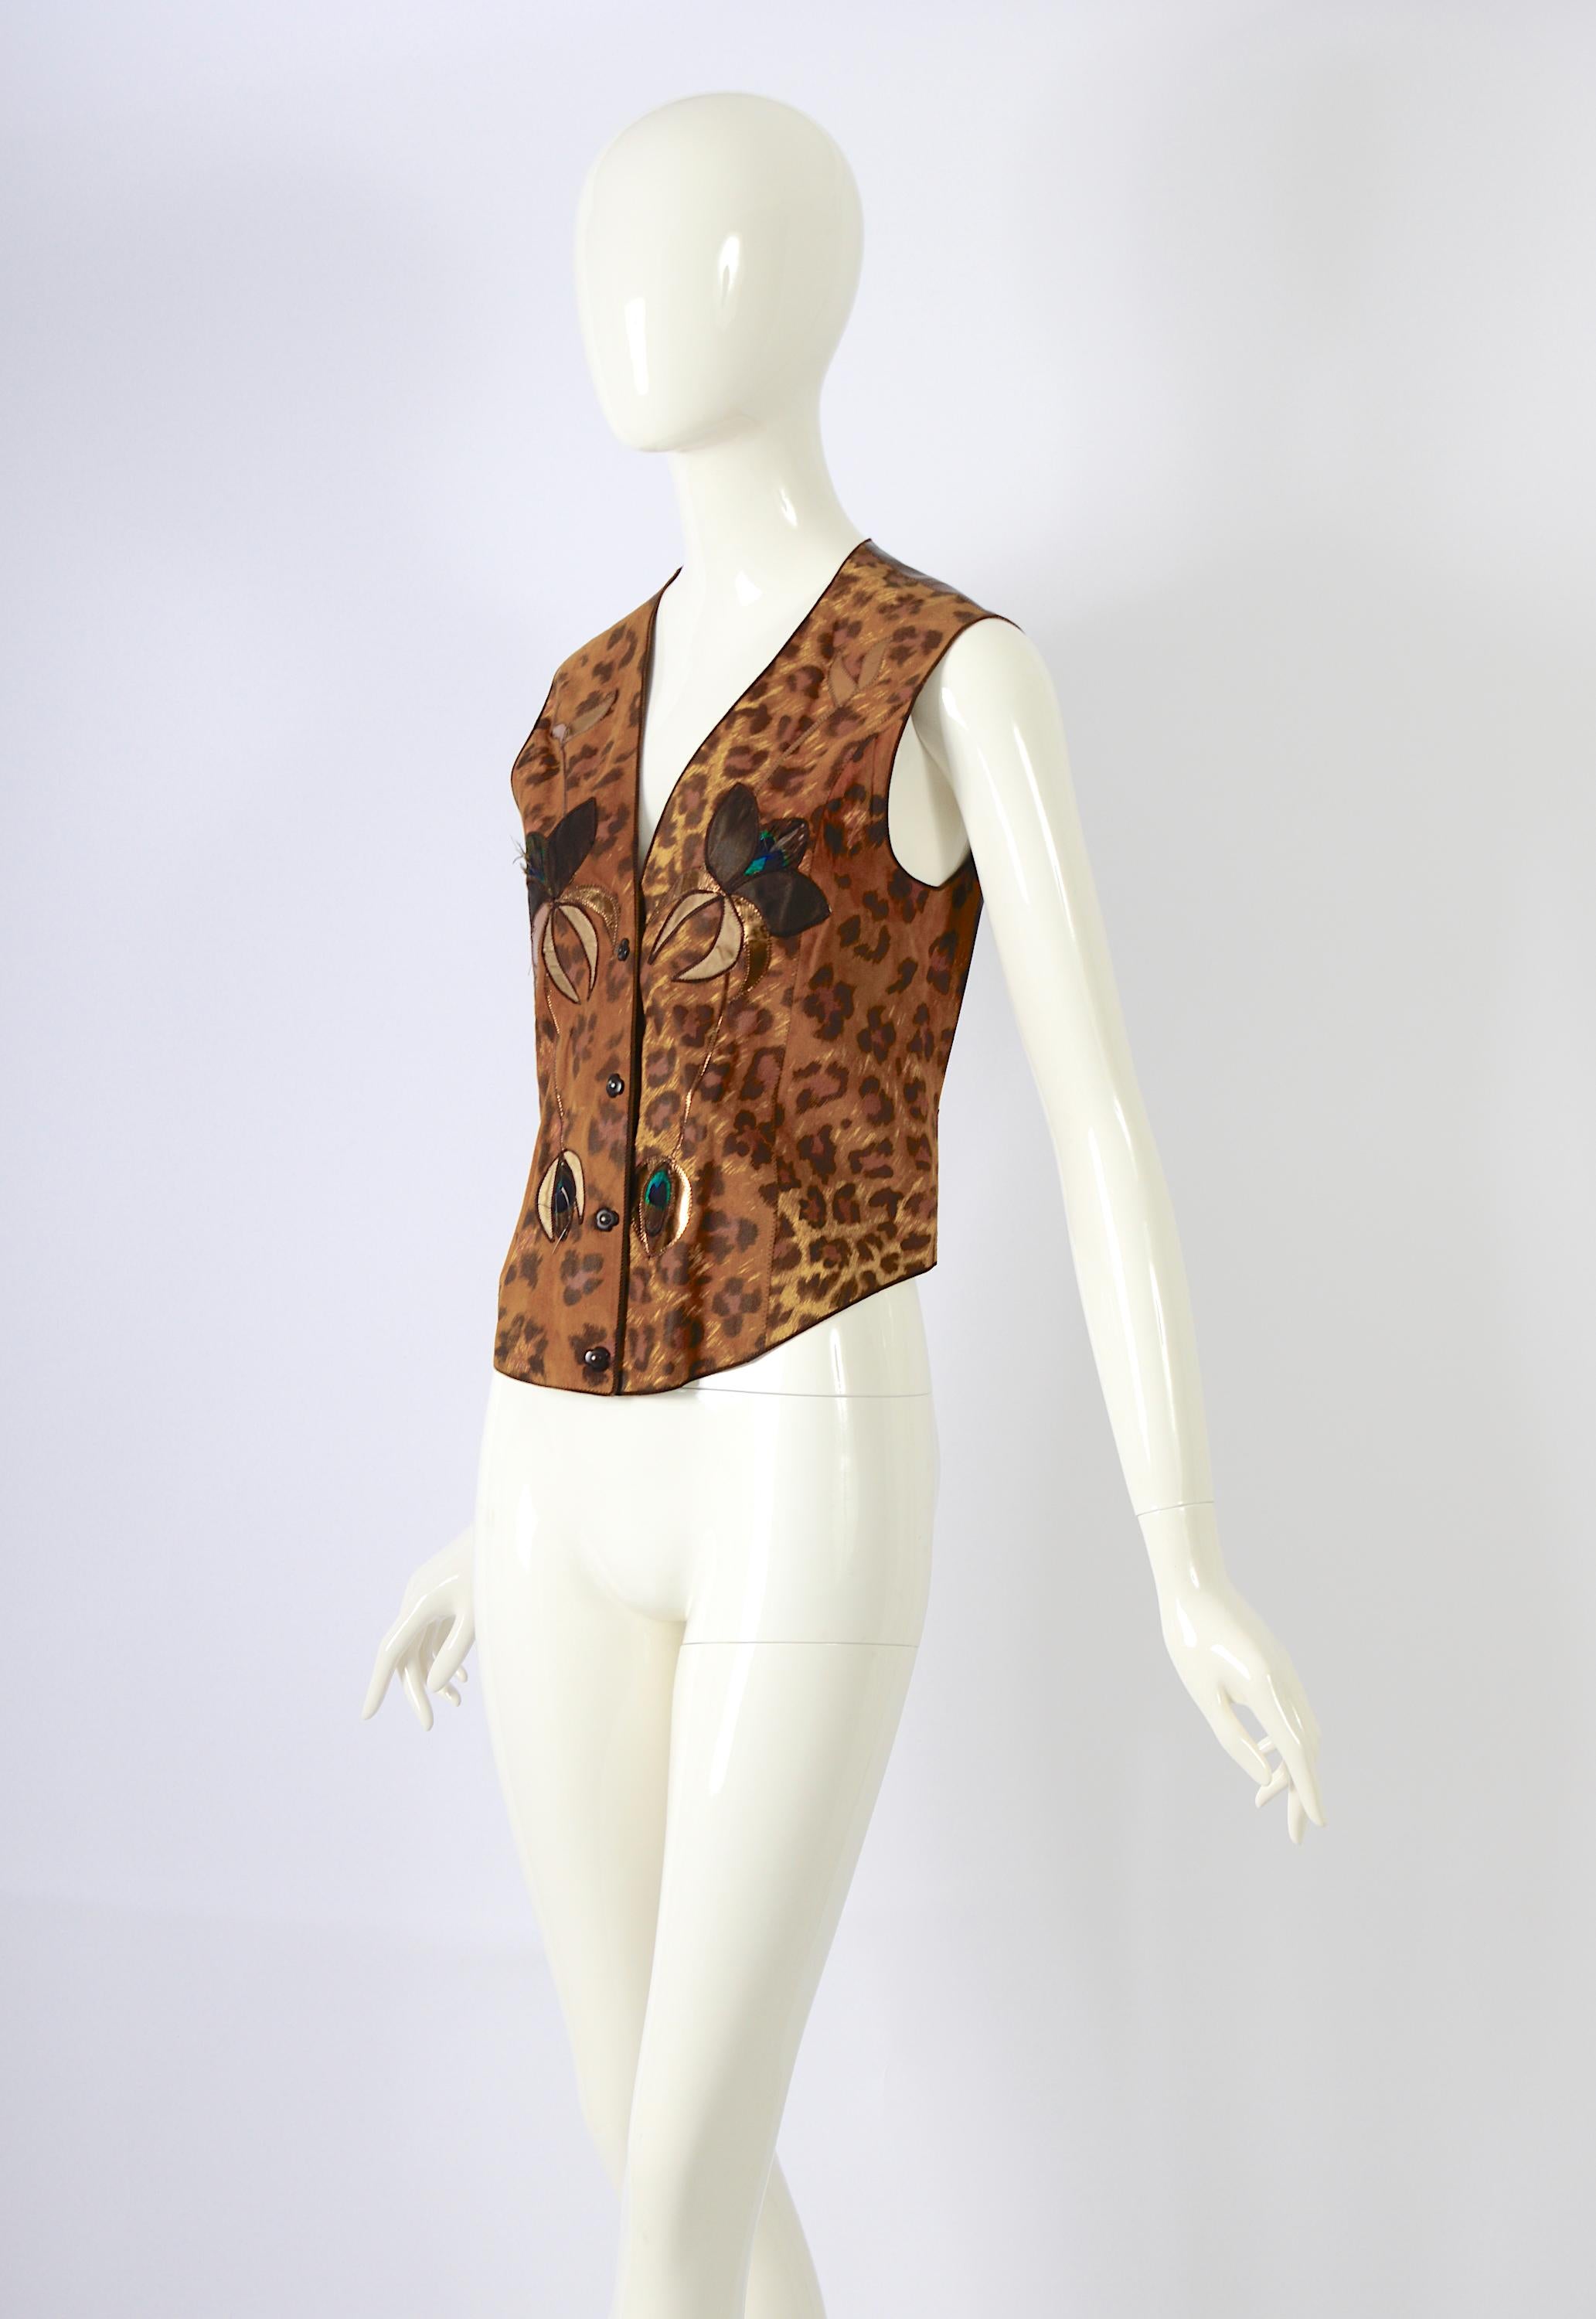 Roberto Cavalli 1970's Vintage Leather & Suede Patchwork Embellished Vests  In Excellent Condition For Sale In Antwerp, BE